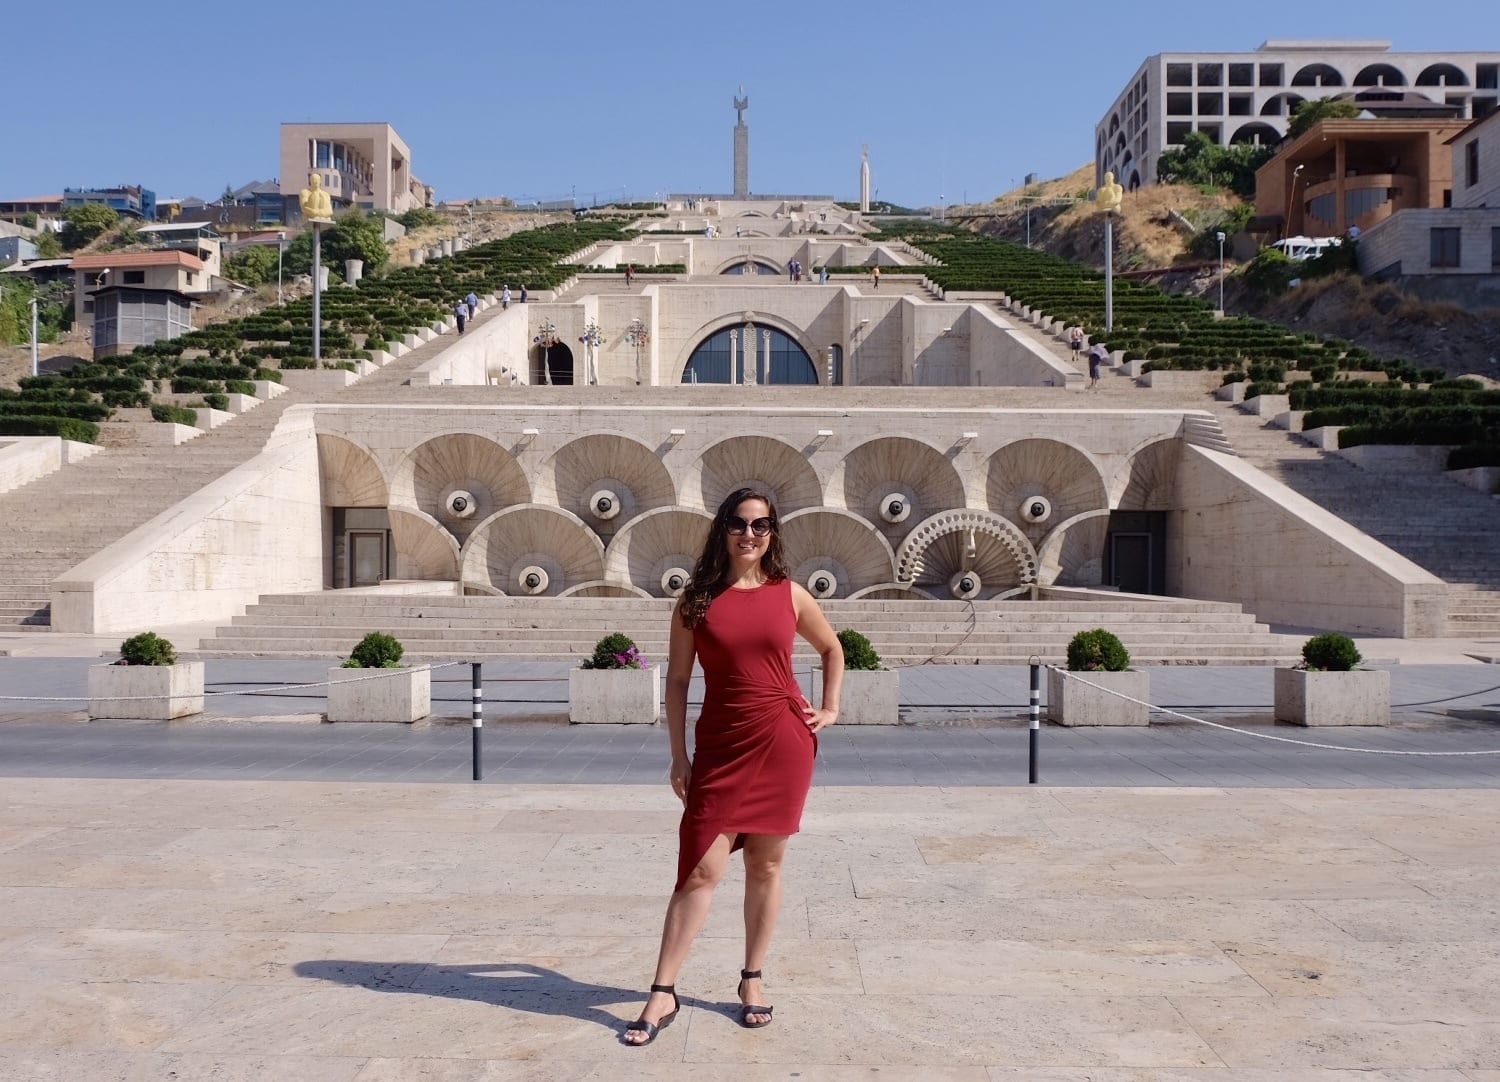 Kate wears a red dress and stands in the Cascade of Lebanon, a pyramid-shaped structure with staircases on each side.